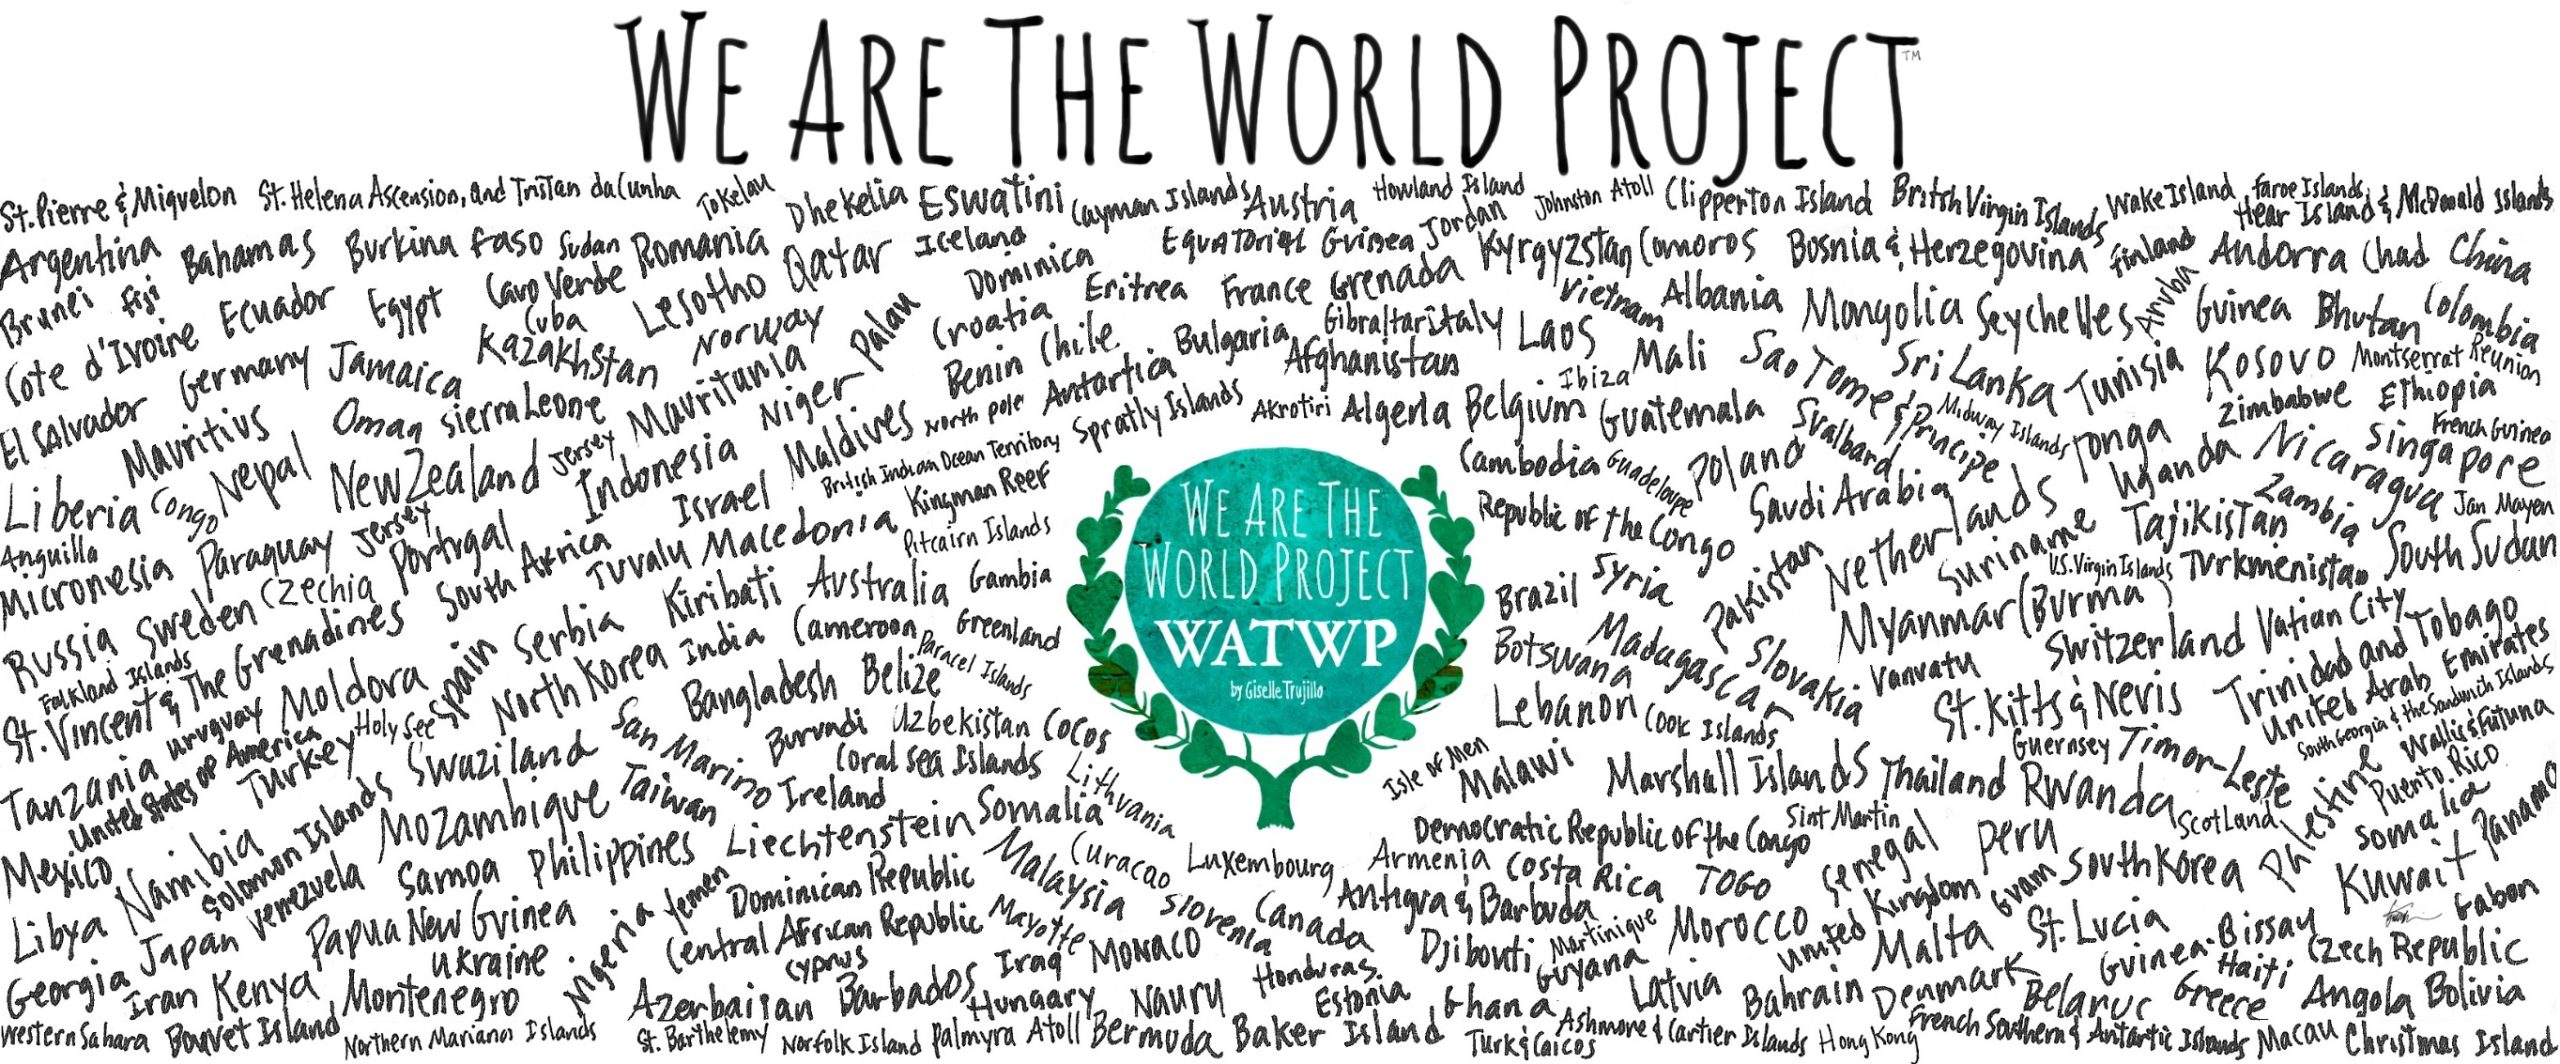 We Are The World Project (WATWP) is a digital publication that offers high-quality content, without gossip, without bullying, and without negativity. The magazine focuses on promoting unity, cultures and exploring the world in depth.